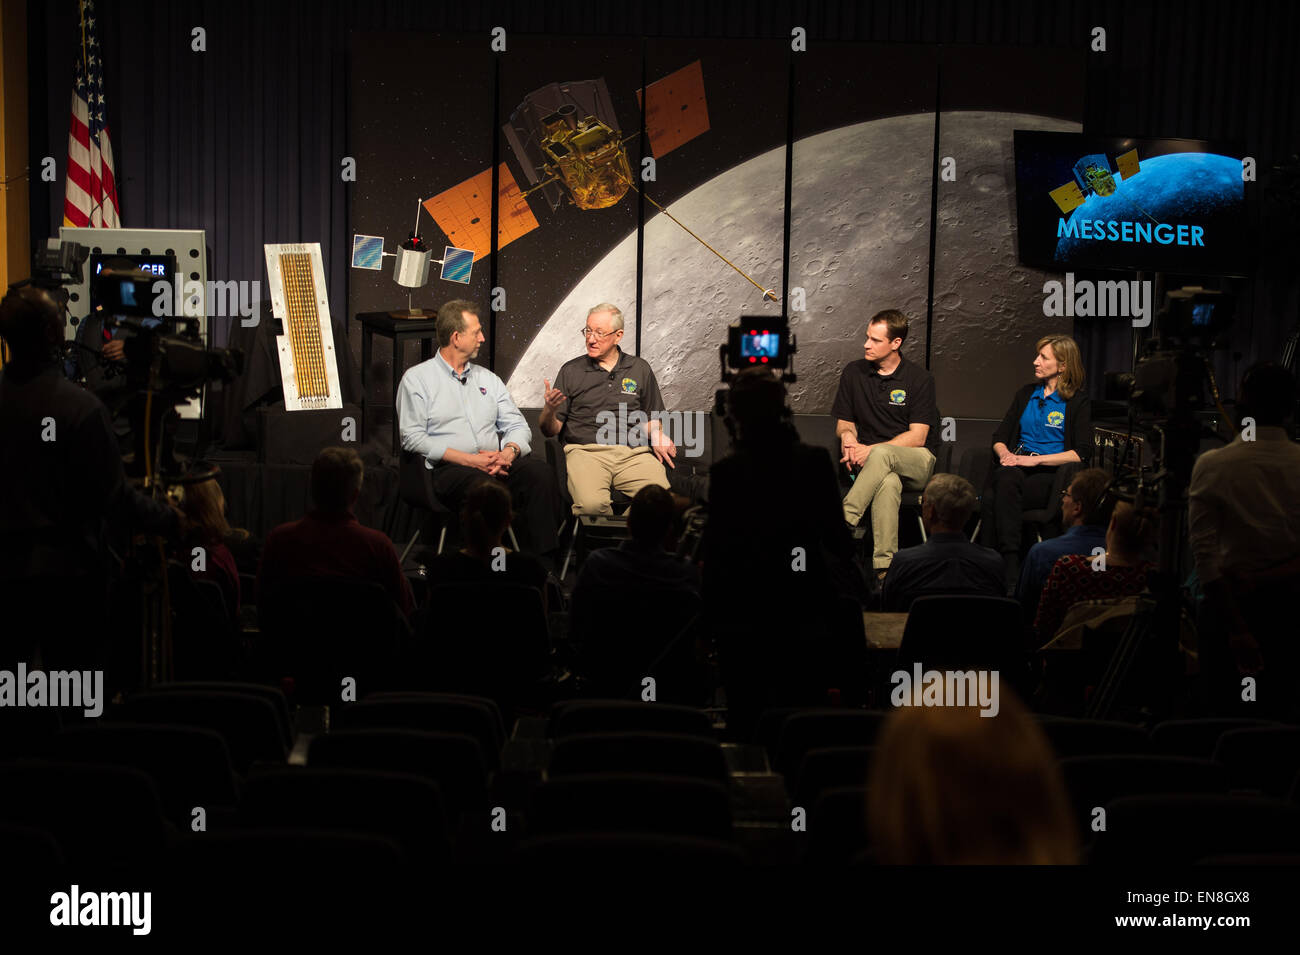 From left to right: James Green, director, Planetary Science Division, NASA Headquarters; Sean Solomon, MESSENGER principal investigator; director, Columbia University's Lamont-Doherty Earth Observatory; Daniel O’Shaughnessy, MESSENGER systems engineer, Johns Hopkins University Applied Physics Laboratory; and Helene Winters, MESSENGER project manager, Johns Hopkins University Applied Physics Laboratory speak at an event to celebrate the conclusion of the MErcury Surface, Space ENvironment, GEochemistry, and Ranging (MESSENGER) Mission Thursday, April 16, 2015 at NASA Headquarters in Washington Stock Photo